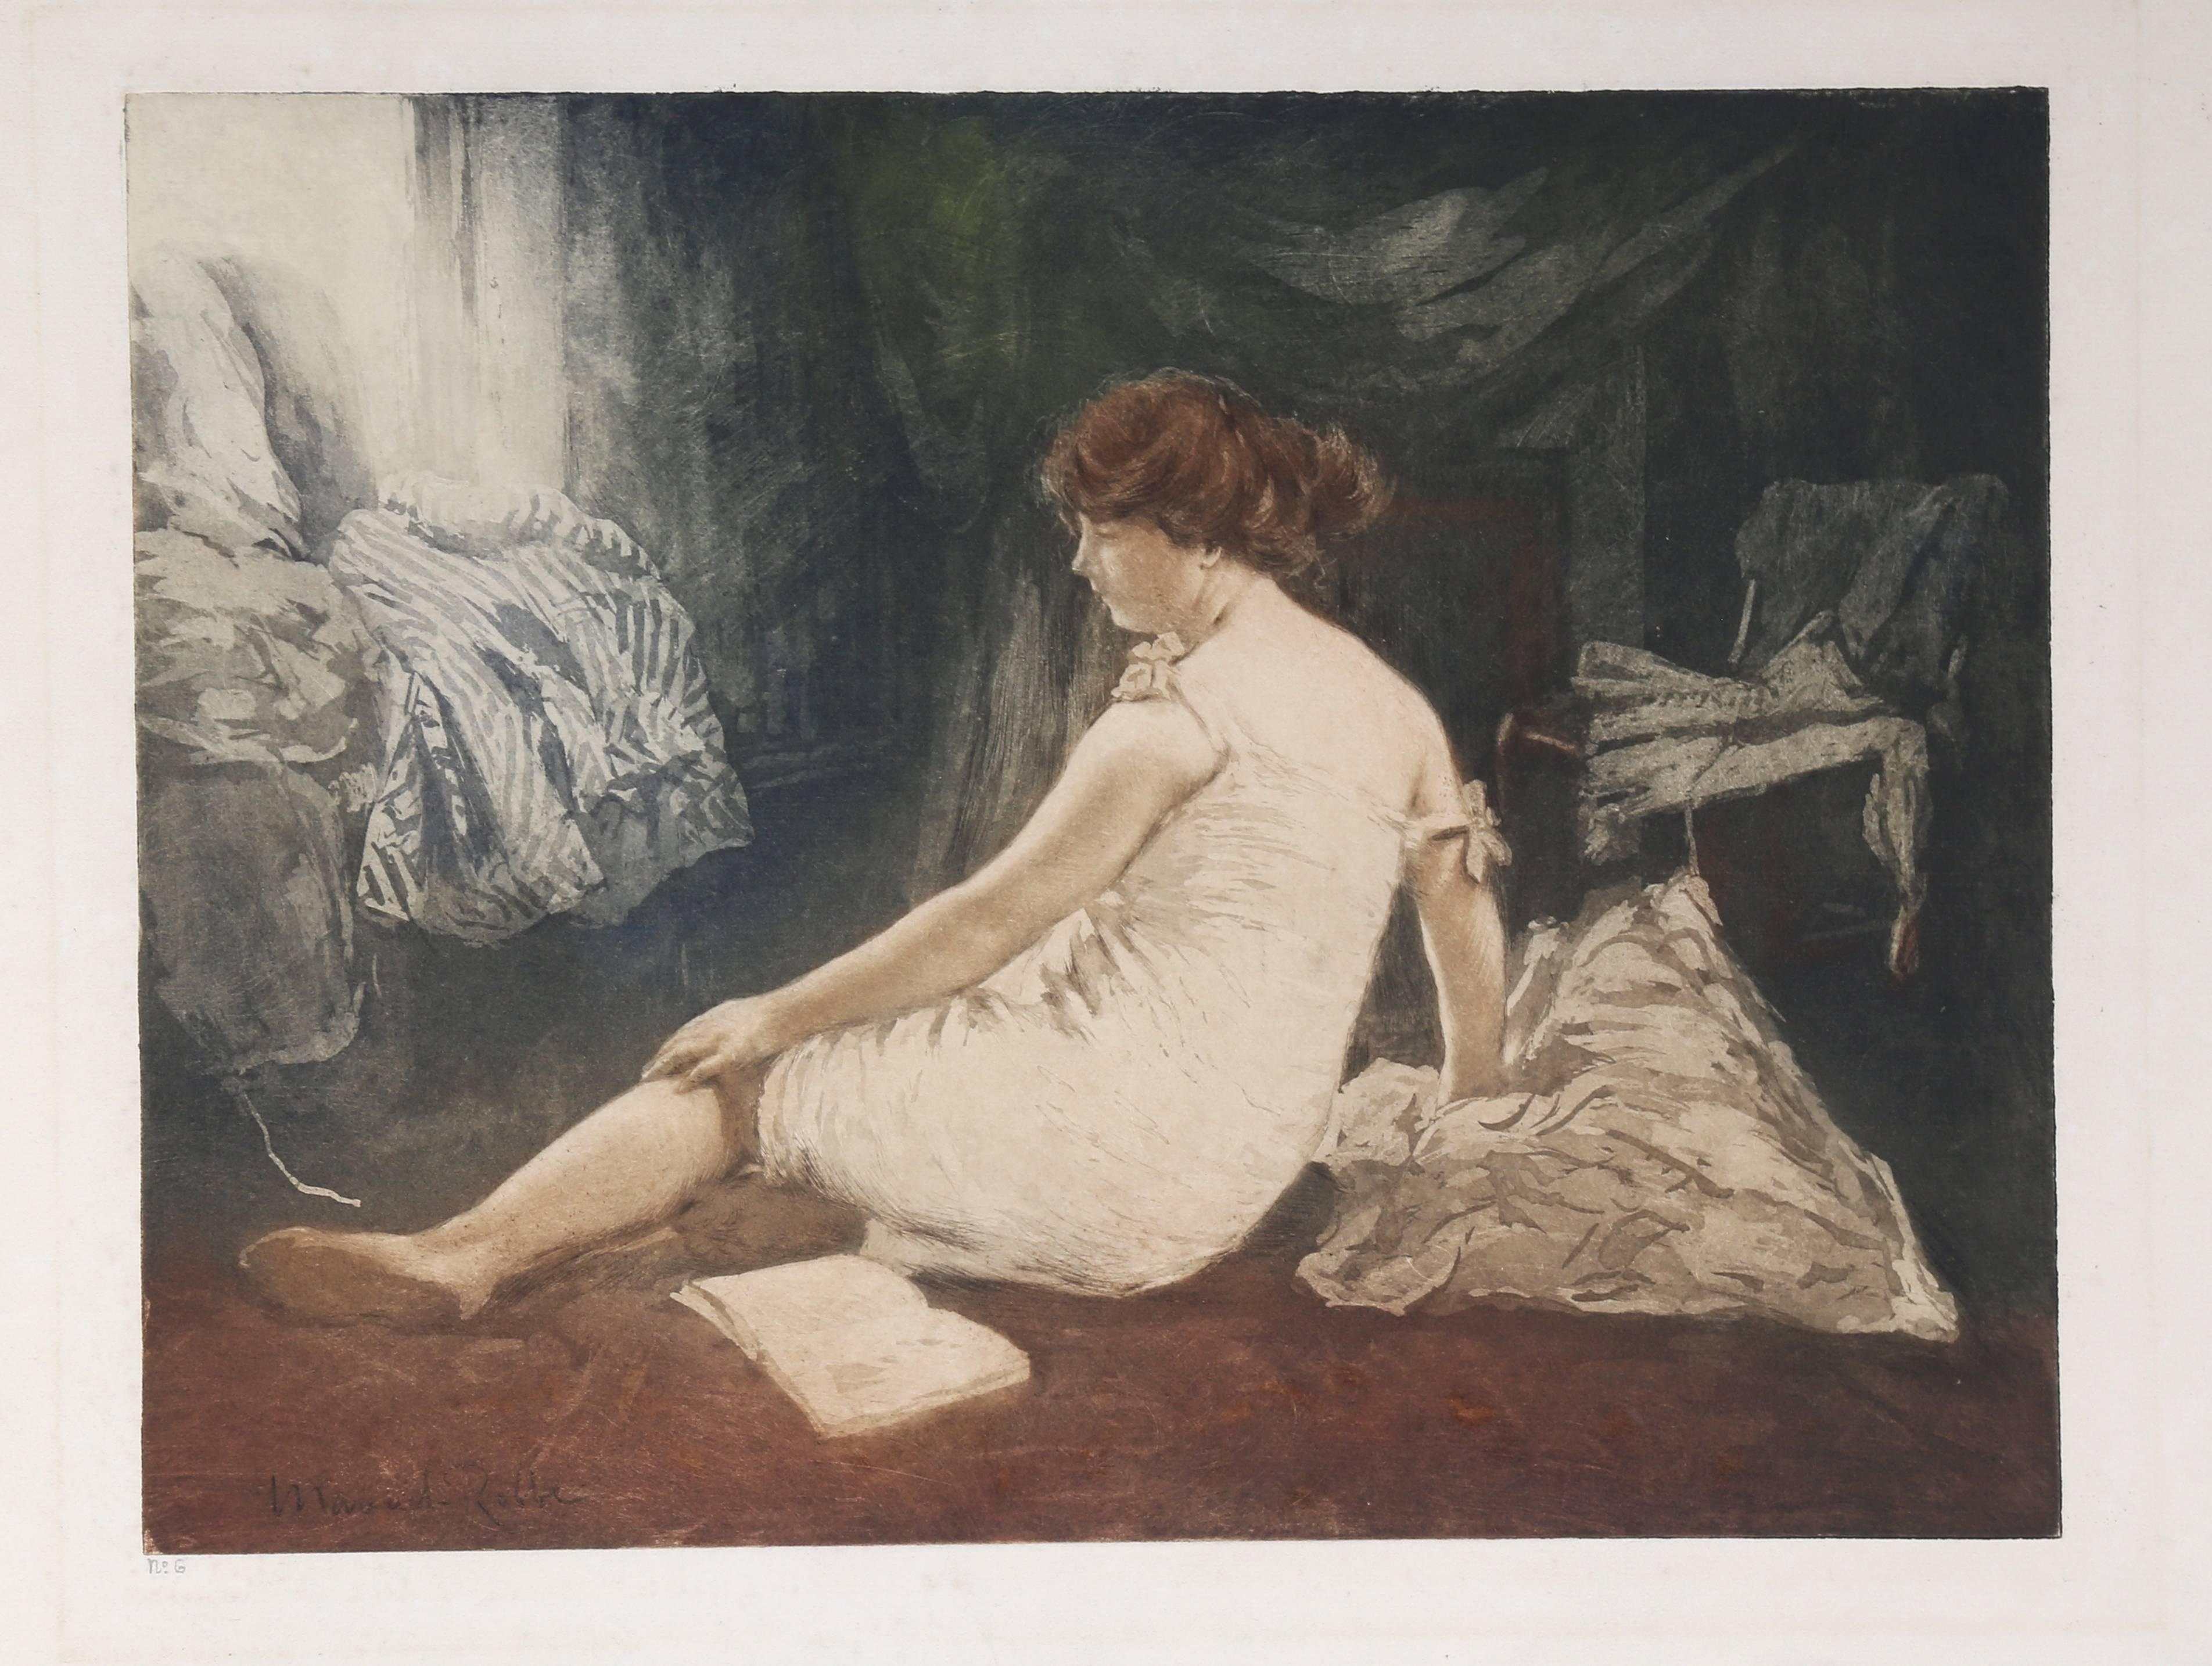 "Le Déshabille, " Etching with Aquatint by Manuel Robbe, circa 1907